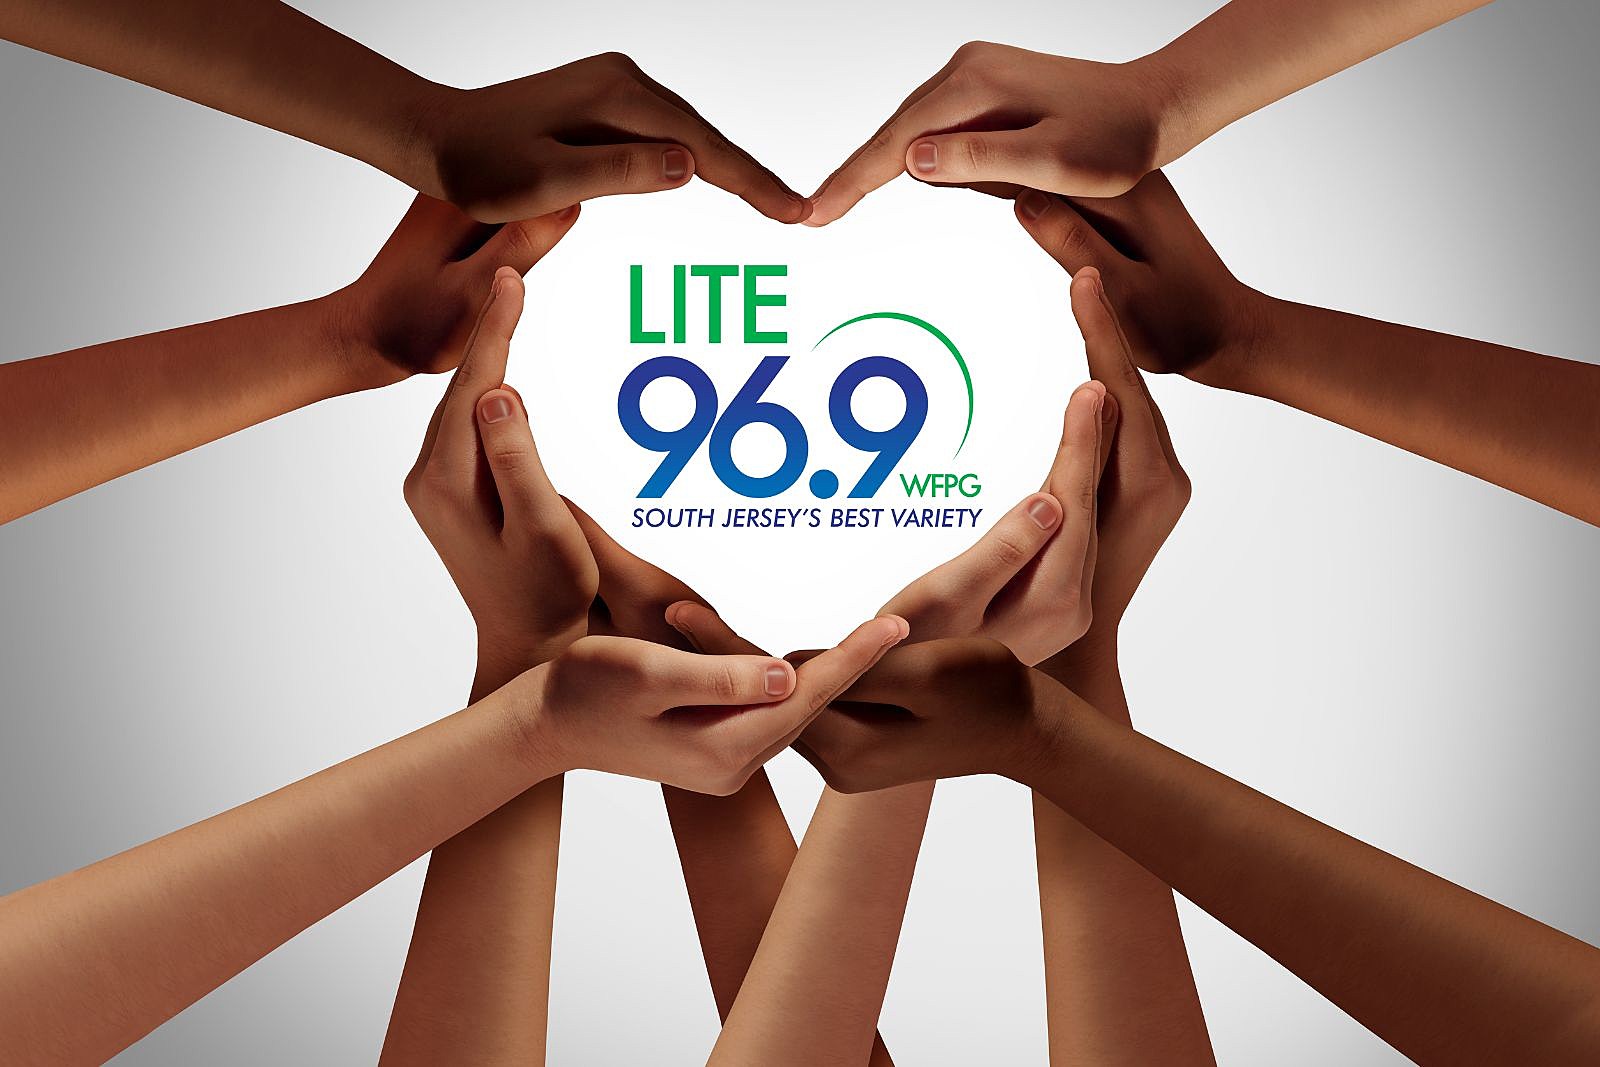 Nominate Lite 96.9's Feel Good Person of the Week